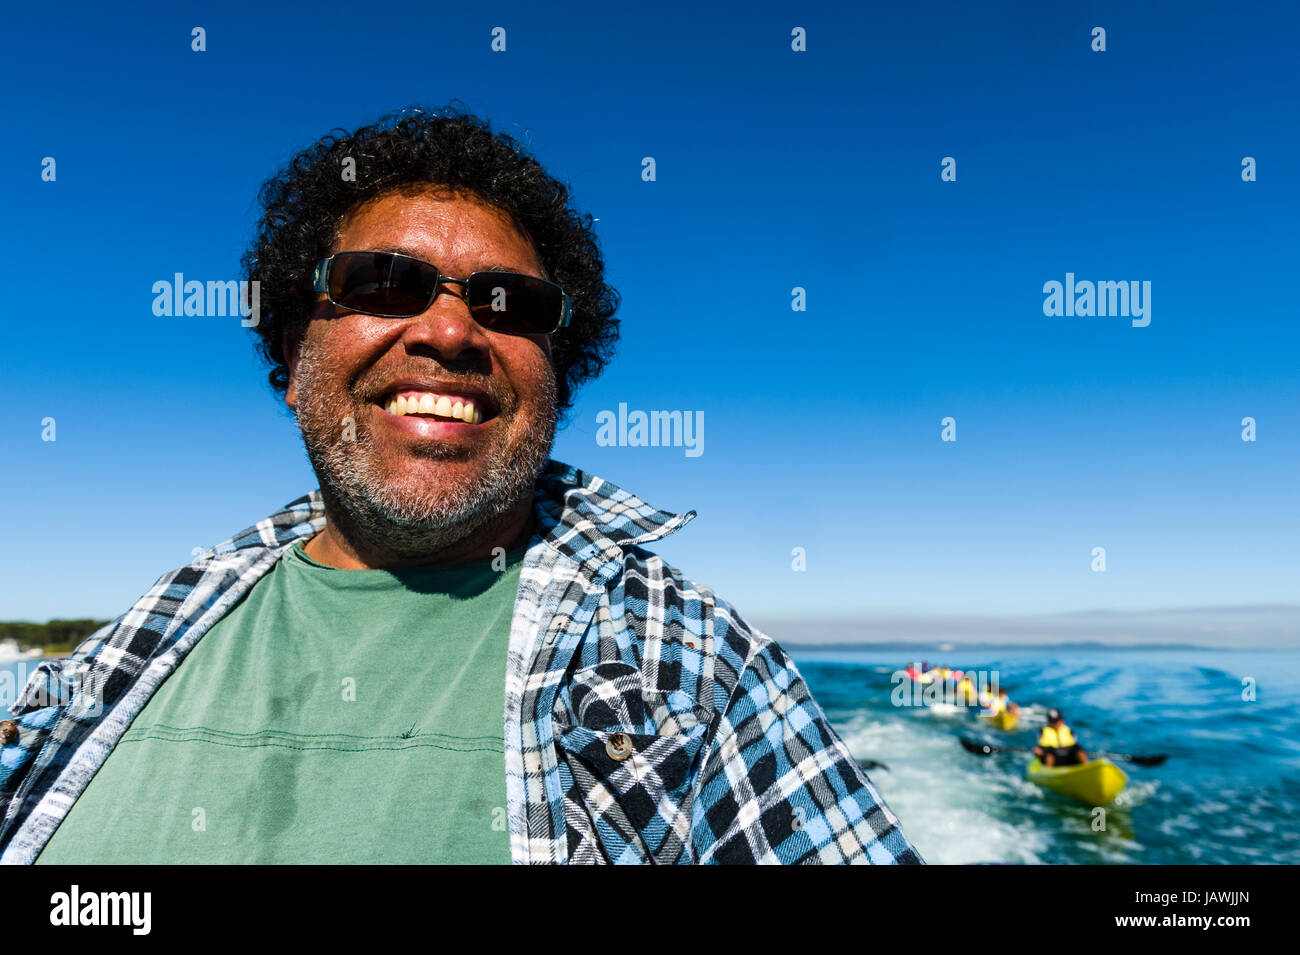 The smiling face of a Aboriginal boat captain and guide wearing sunglasses. Stock Photo